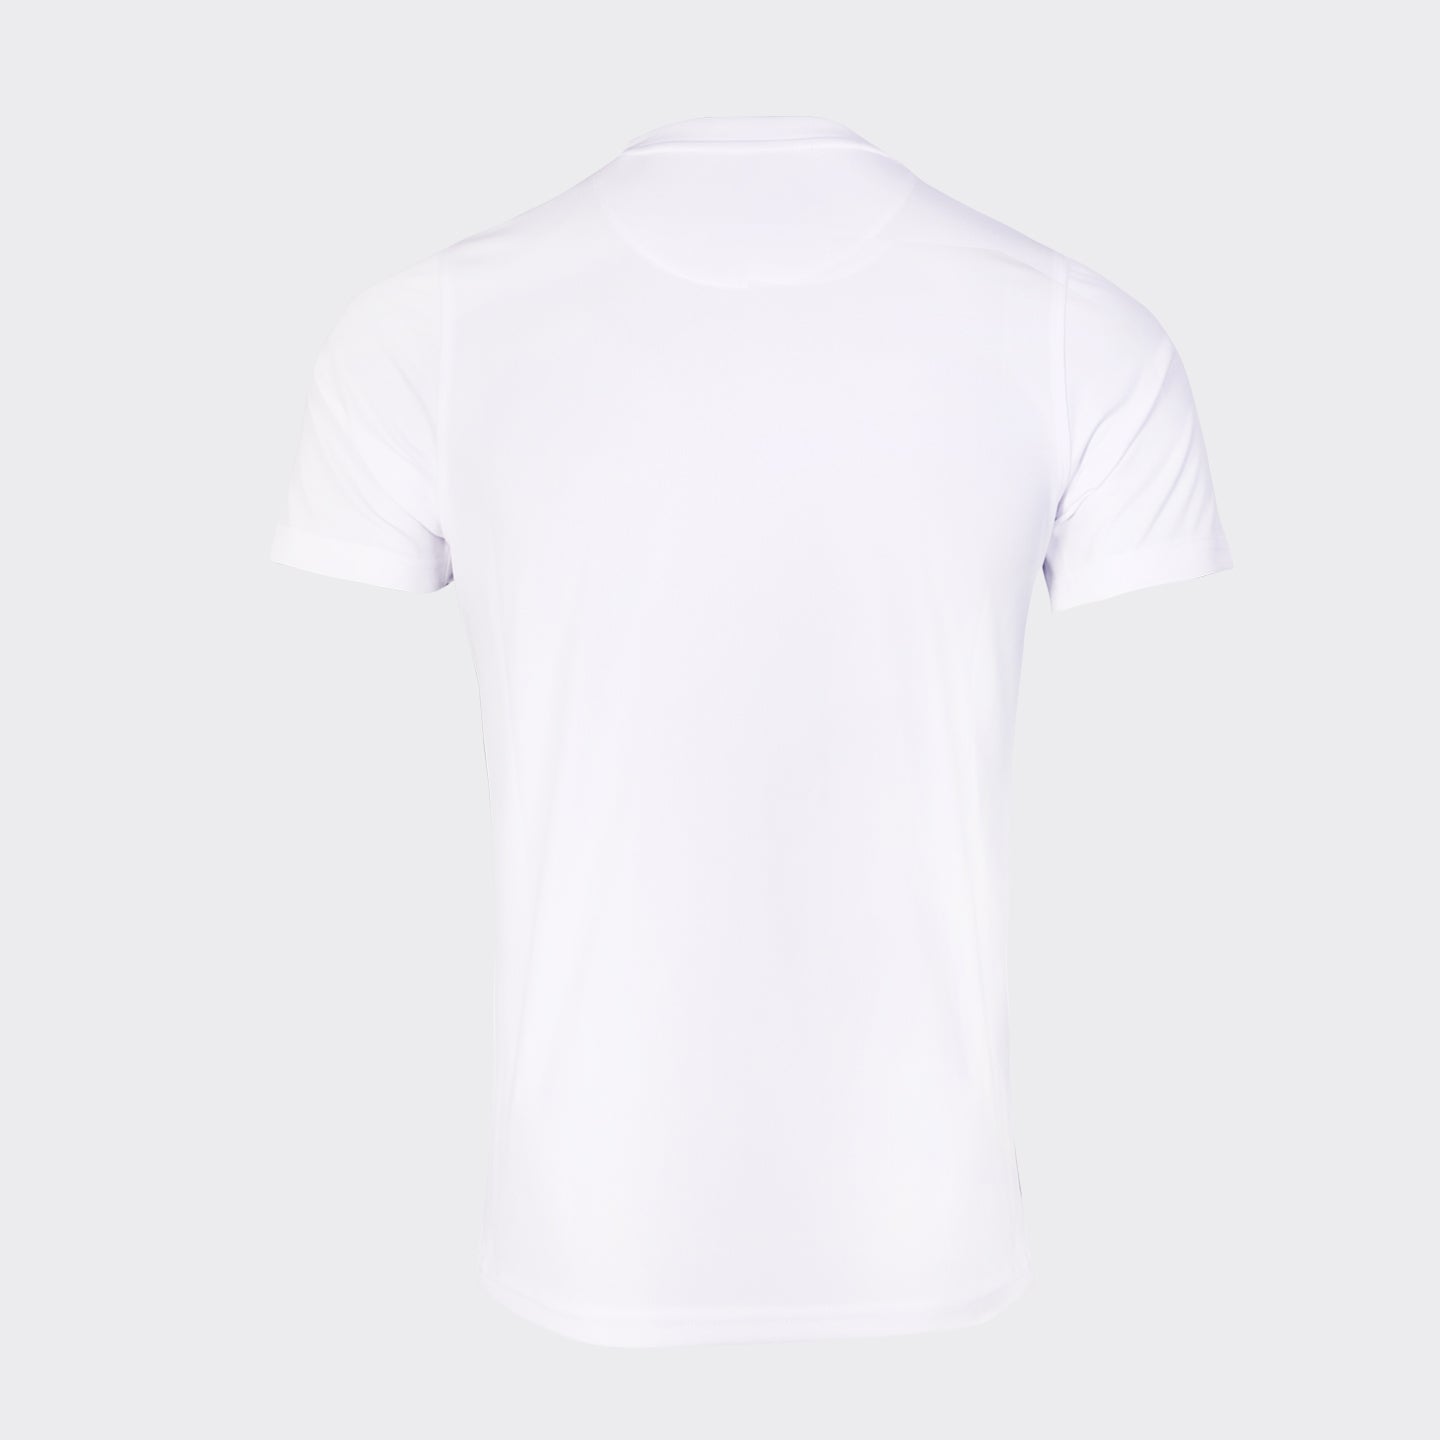 Cave Performance Top - White / Blue